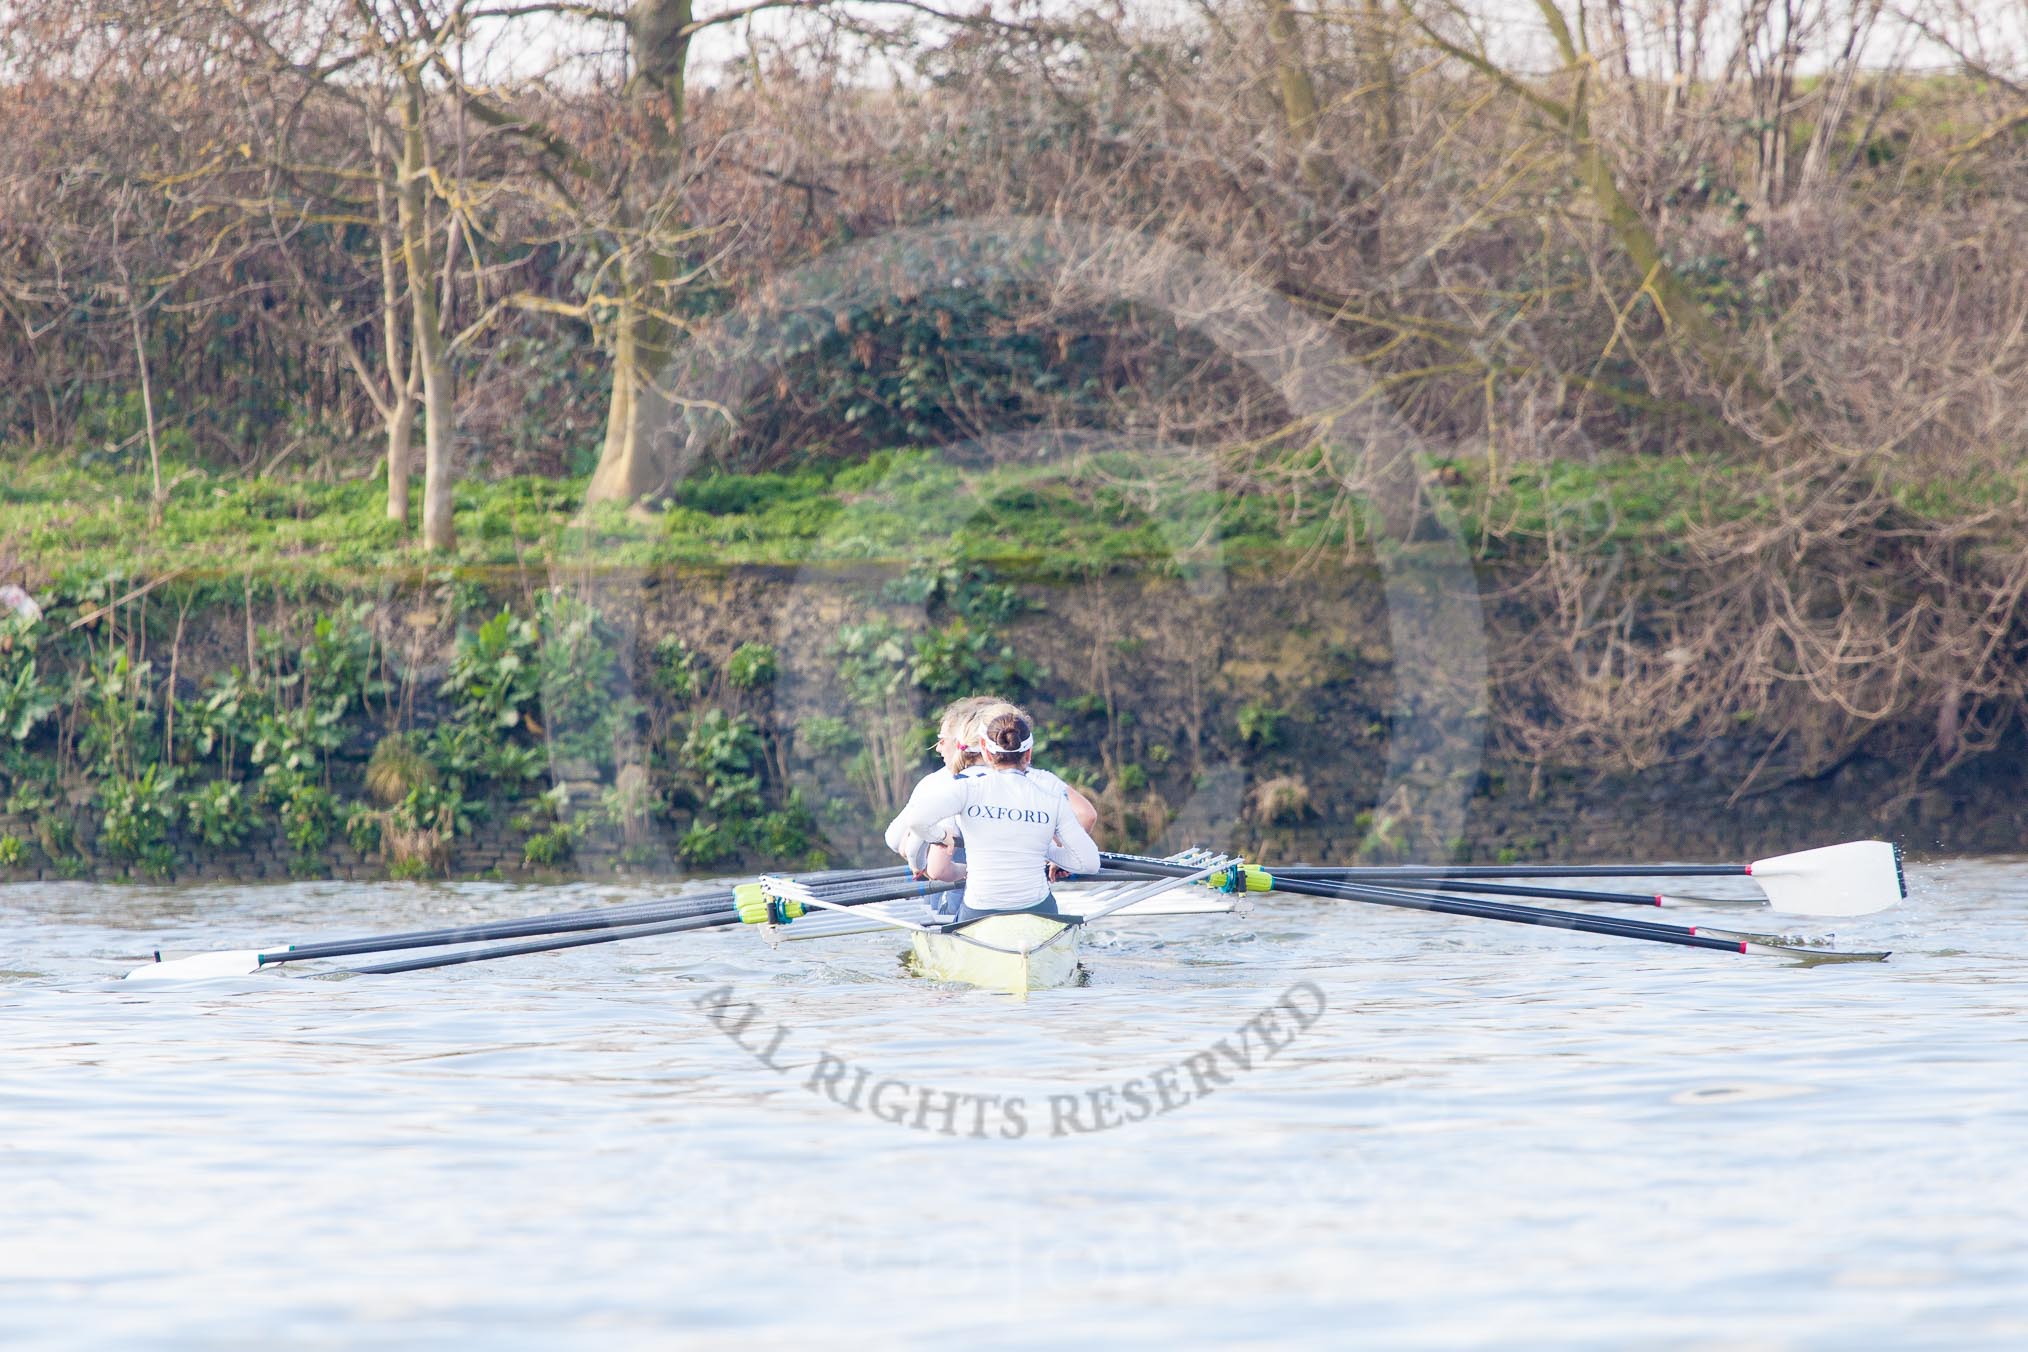 The Boat Race season 2014 - fixture OUWBC vs Molesey BC.




on 01 March 2014 at 12:51, image #104